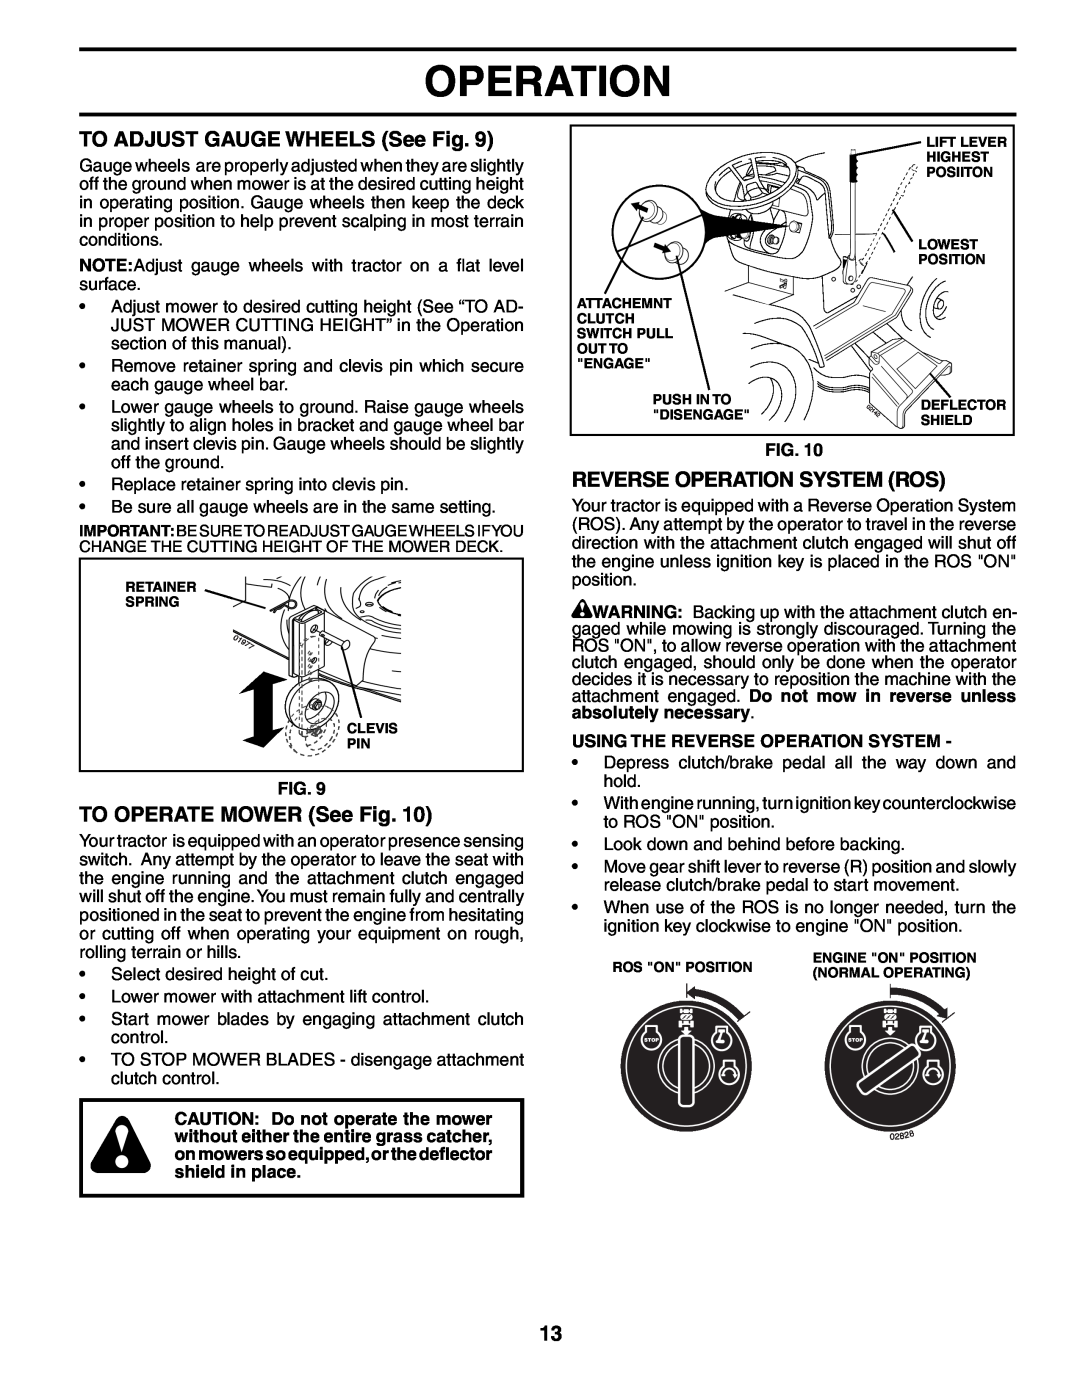 Husqvarna GT2254 owner manual TO ADJUST GAUGE WHEELS See Fig, TO OPERATE MOWER See Fig, Reverse Operation System Ros 